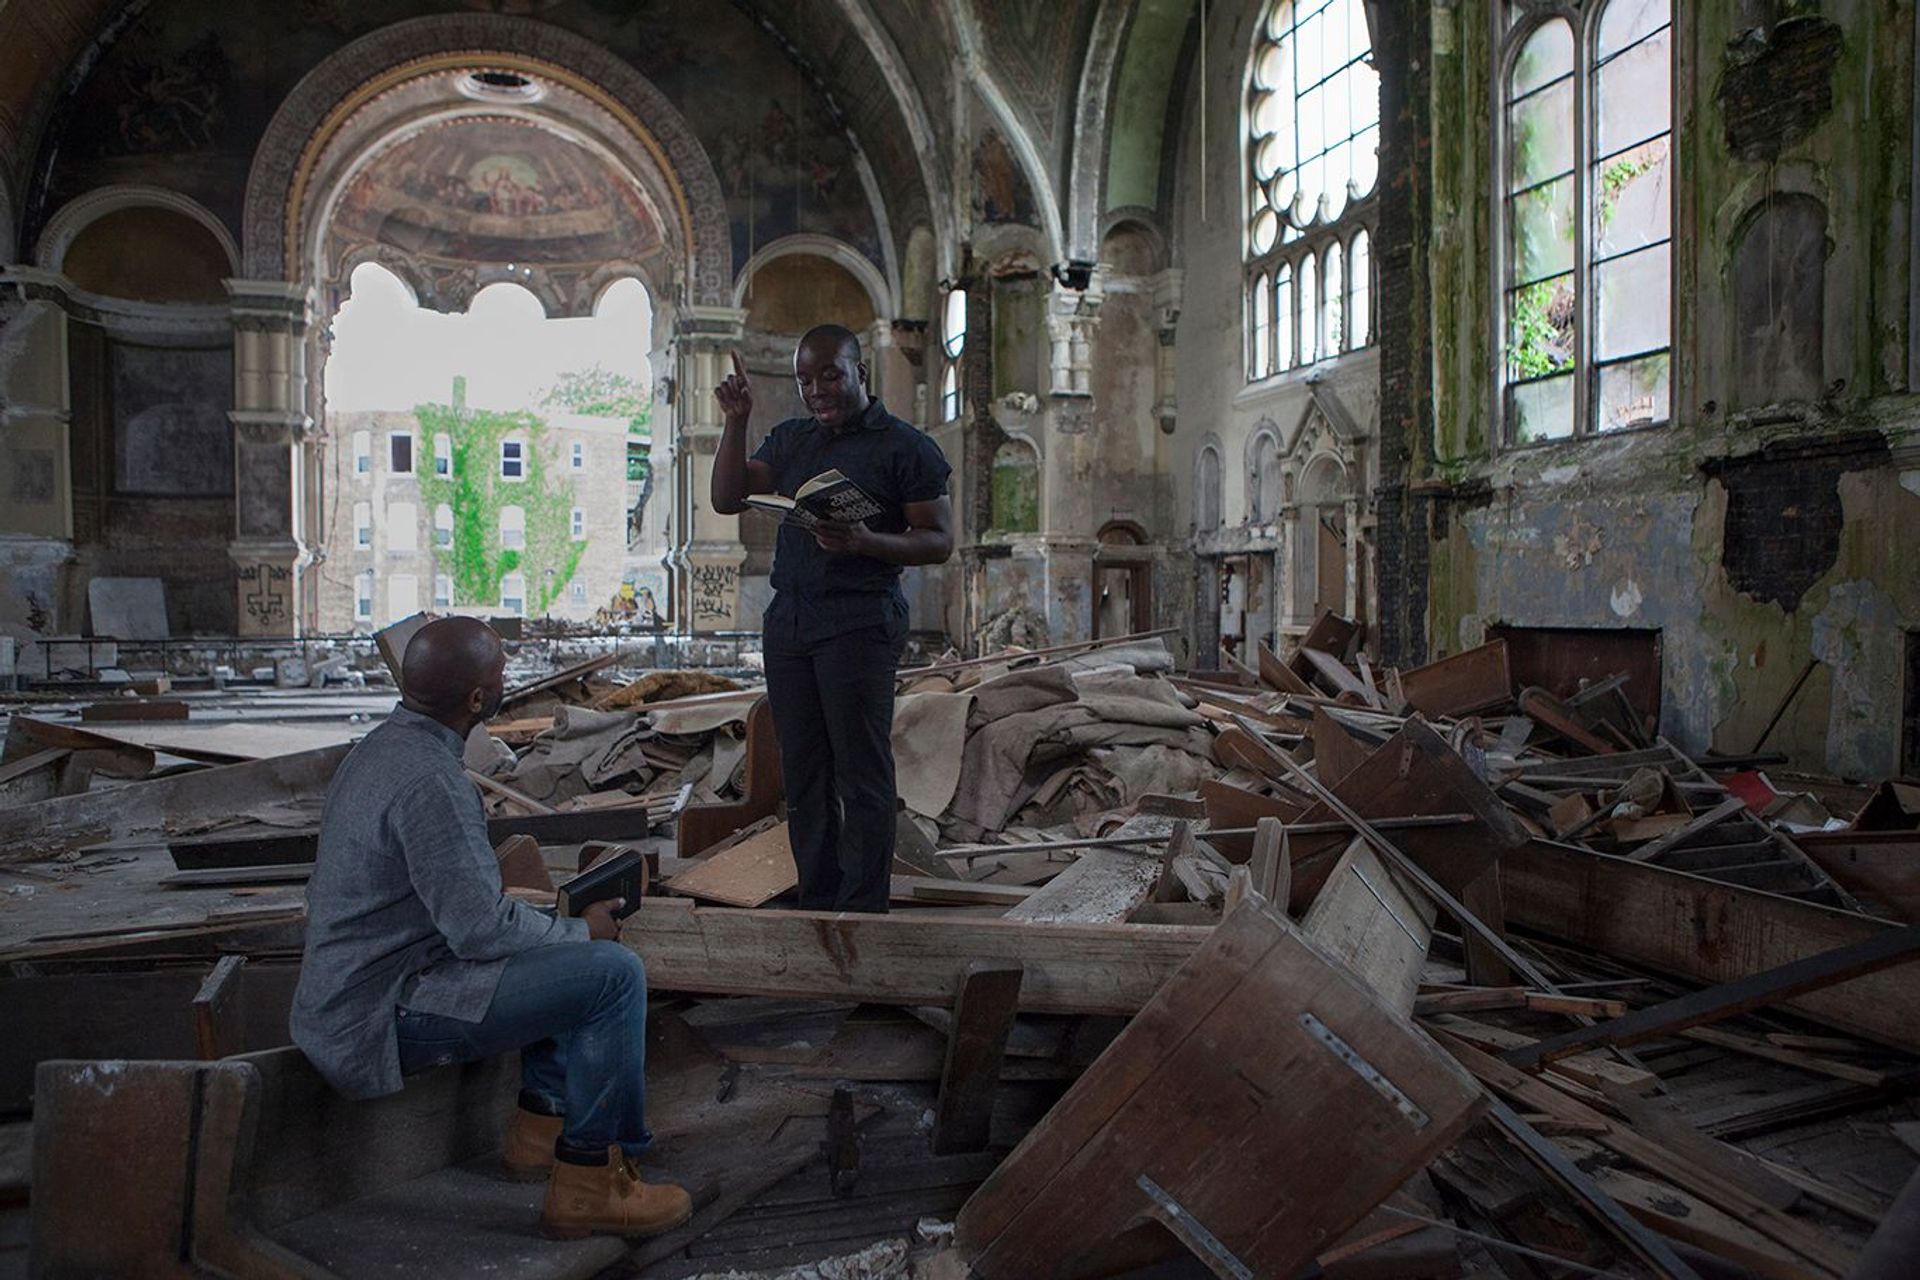 Theaster Gates's Gone Are the Days of Shelter and Martyr, a 2014 video work included in the New Museum show © Theaster Gates; Courtesy of White Cube and Regen Projects, Los Angeles